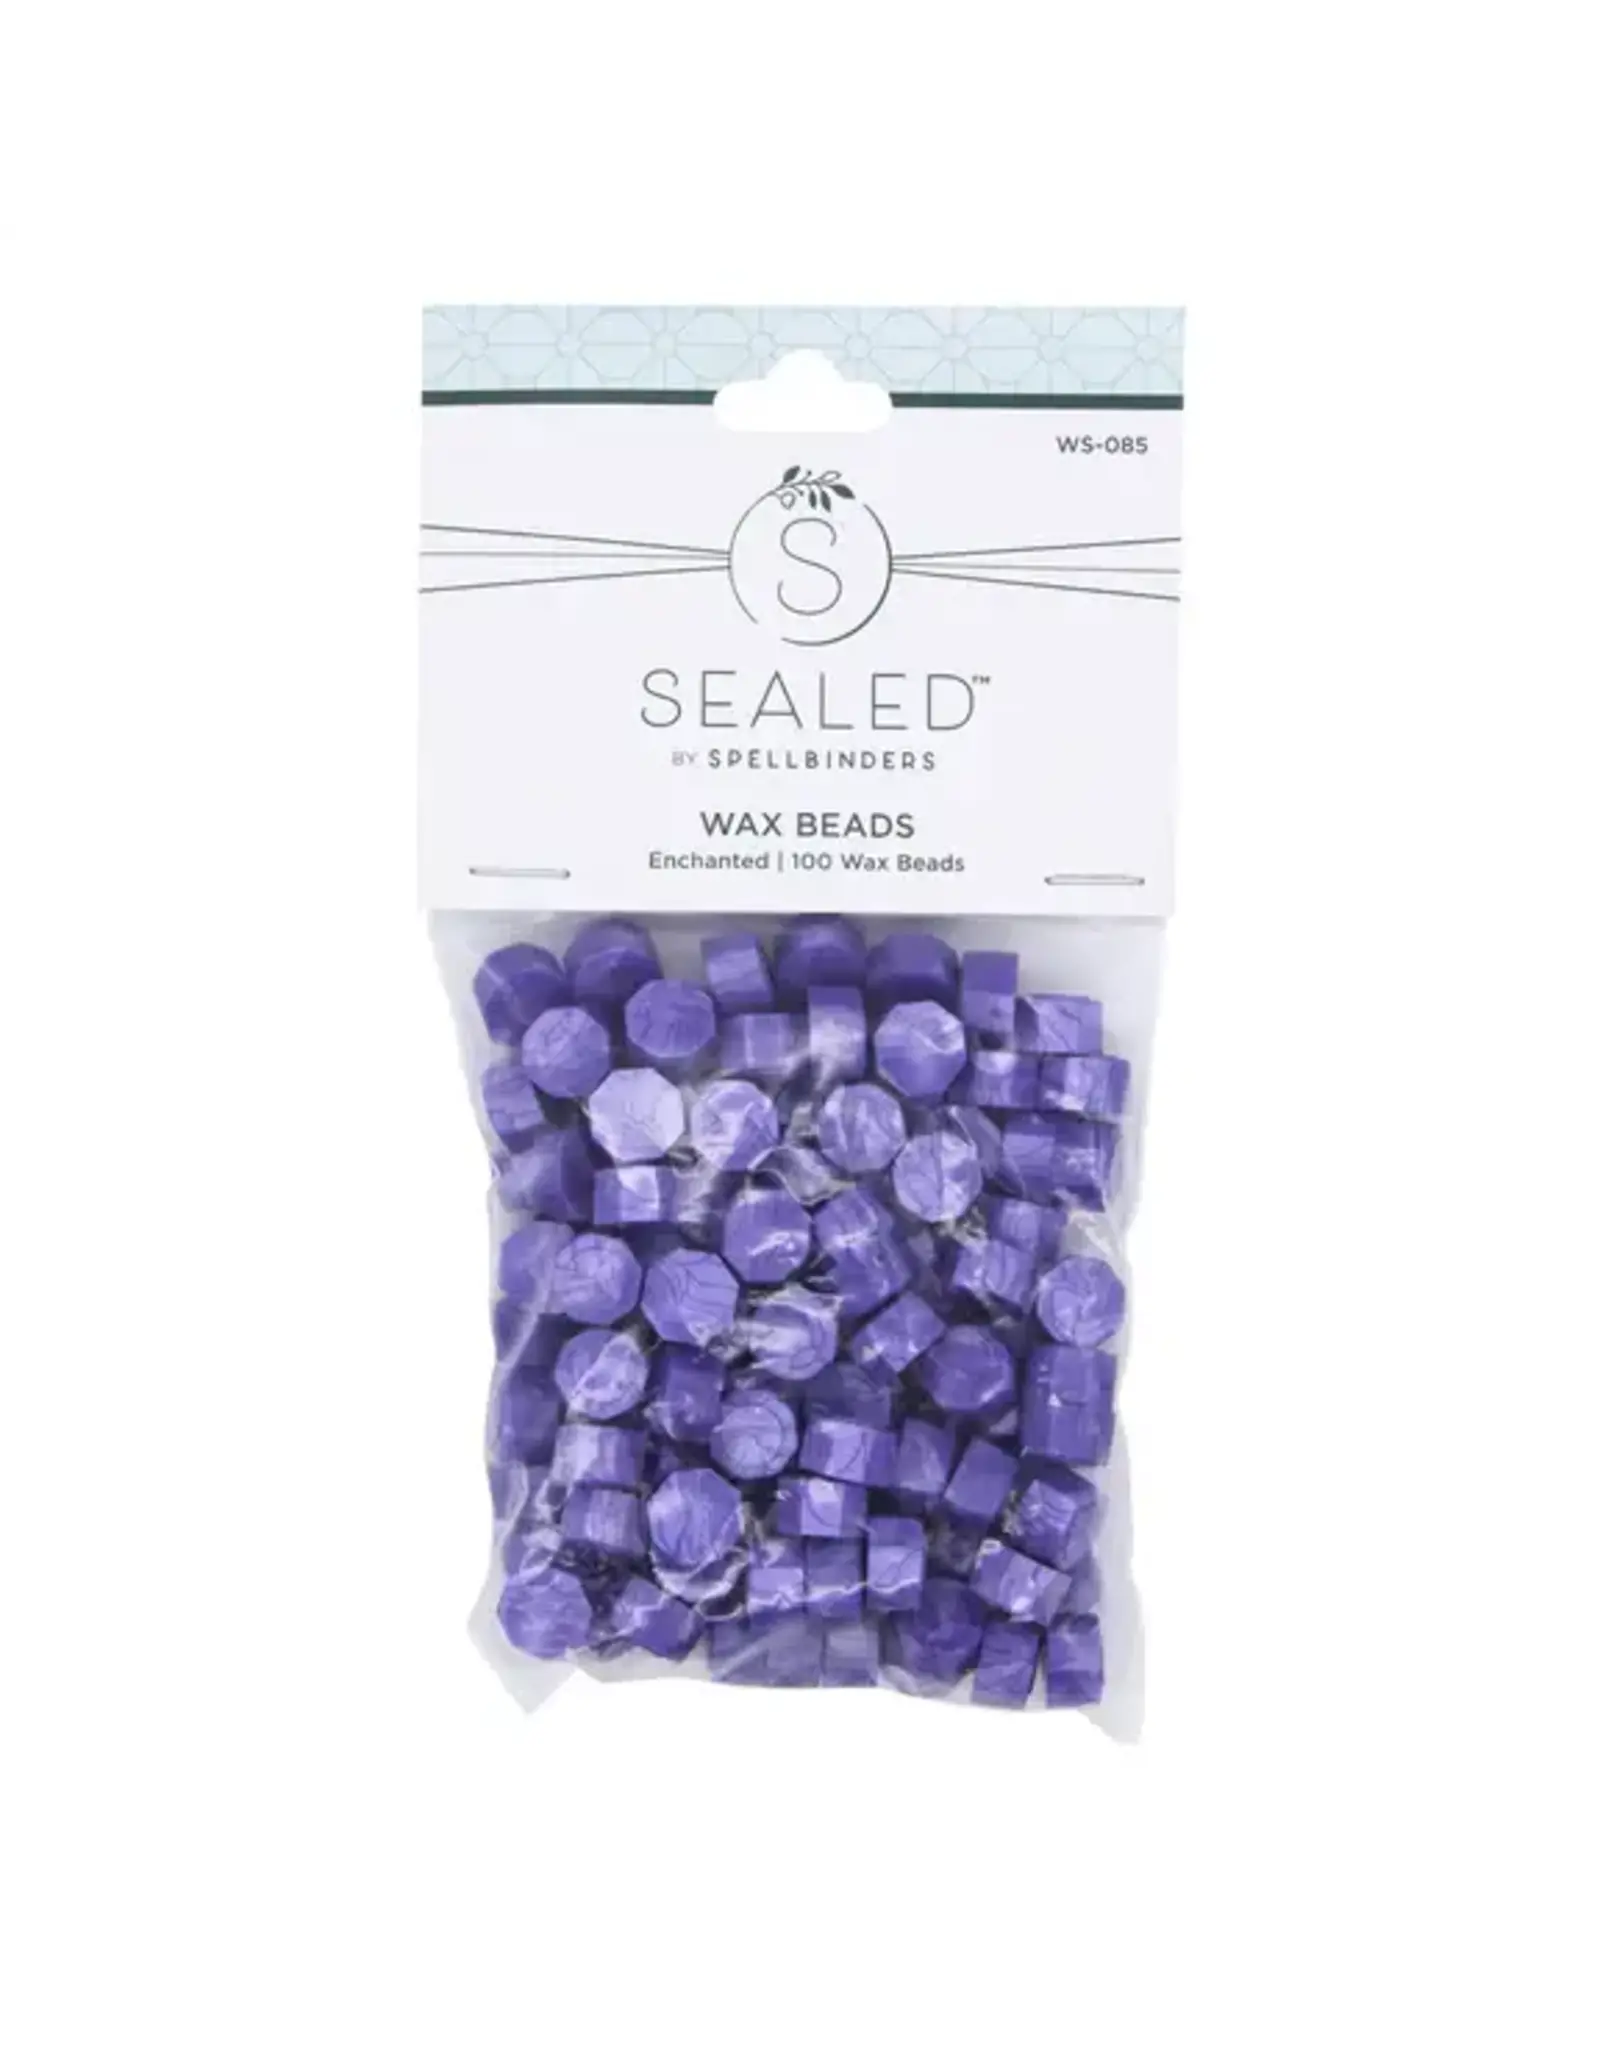 SPELLBINDERS SPELLBINDERS SEALED BY SPELLBINDERS COLLECTION ENCHANTED WAX BEADS 100/PK